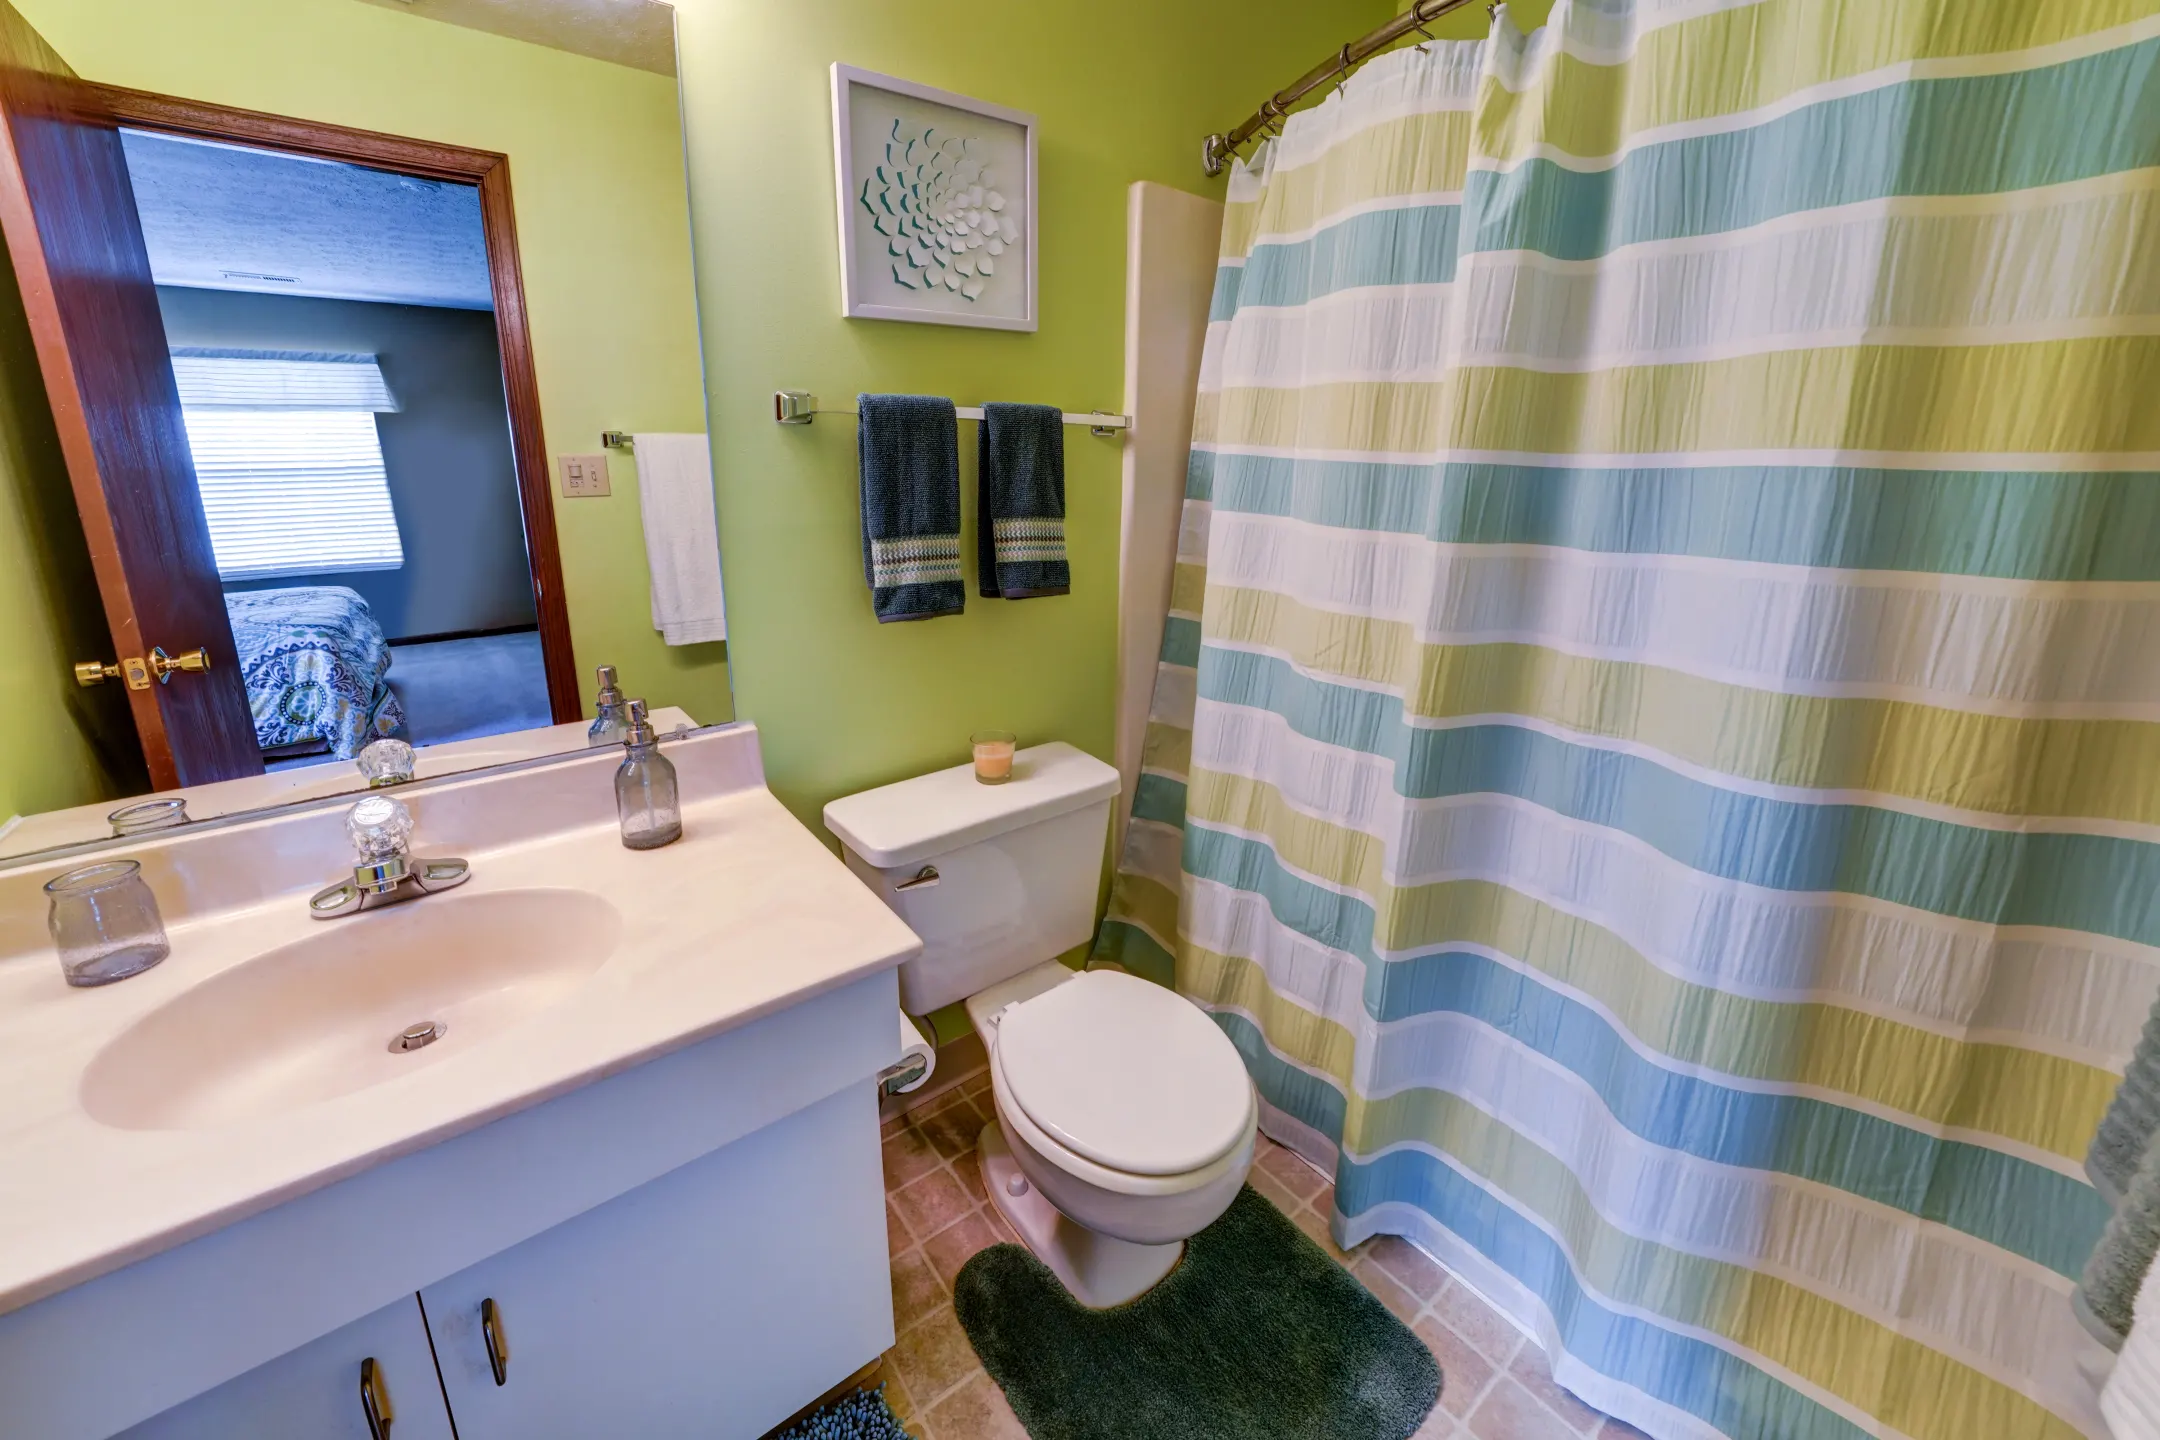 Bathroom - Sunblest Apartment Homes - Fishers, IN